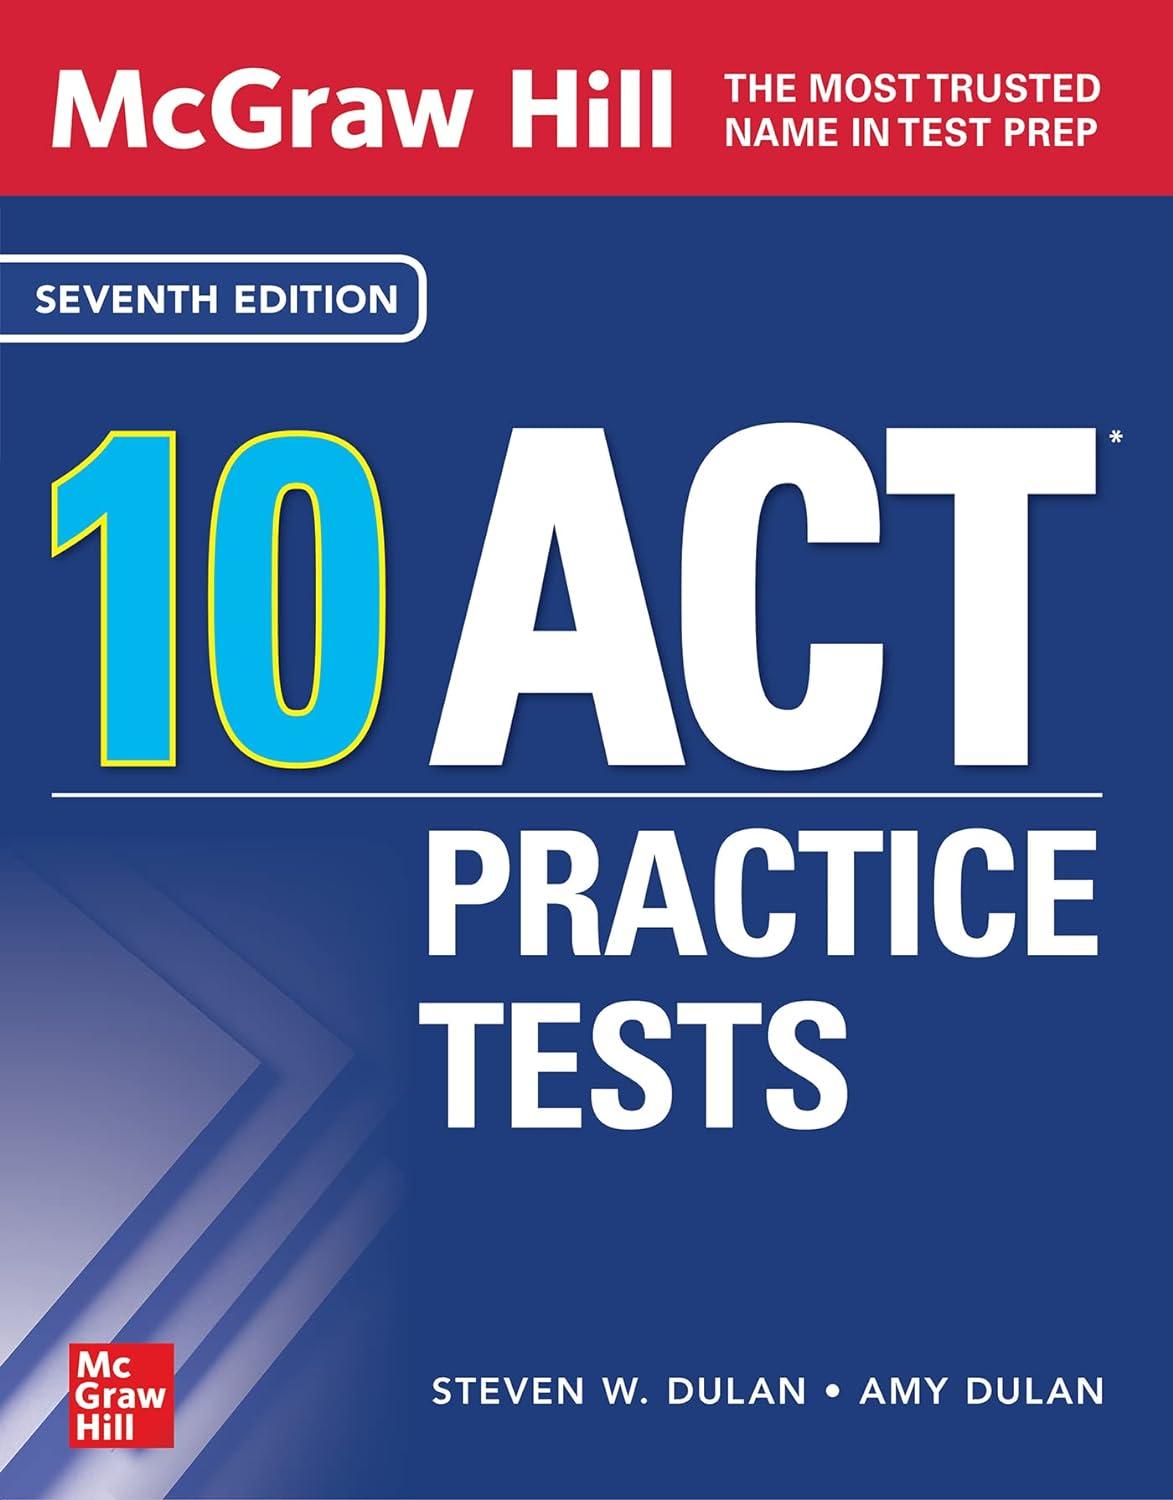 mcgraw hill 10 act practice tests 7th edition steven dulan, amy dulan 1264792093, 978-1264792092